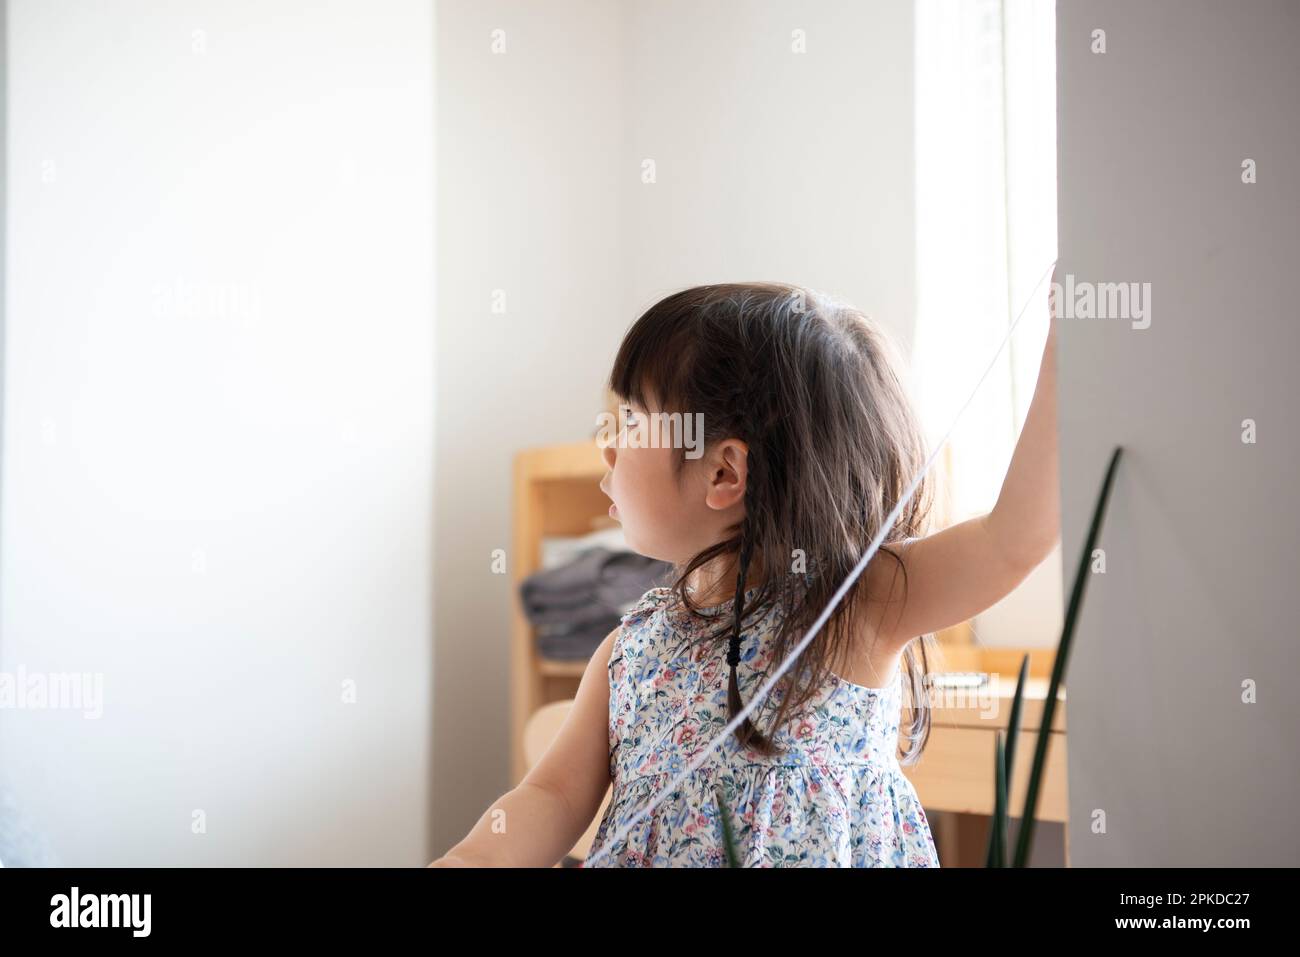 Girl playing inside house Stock Photo